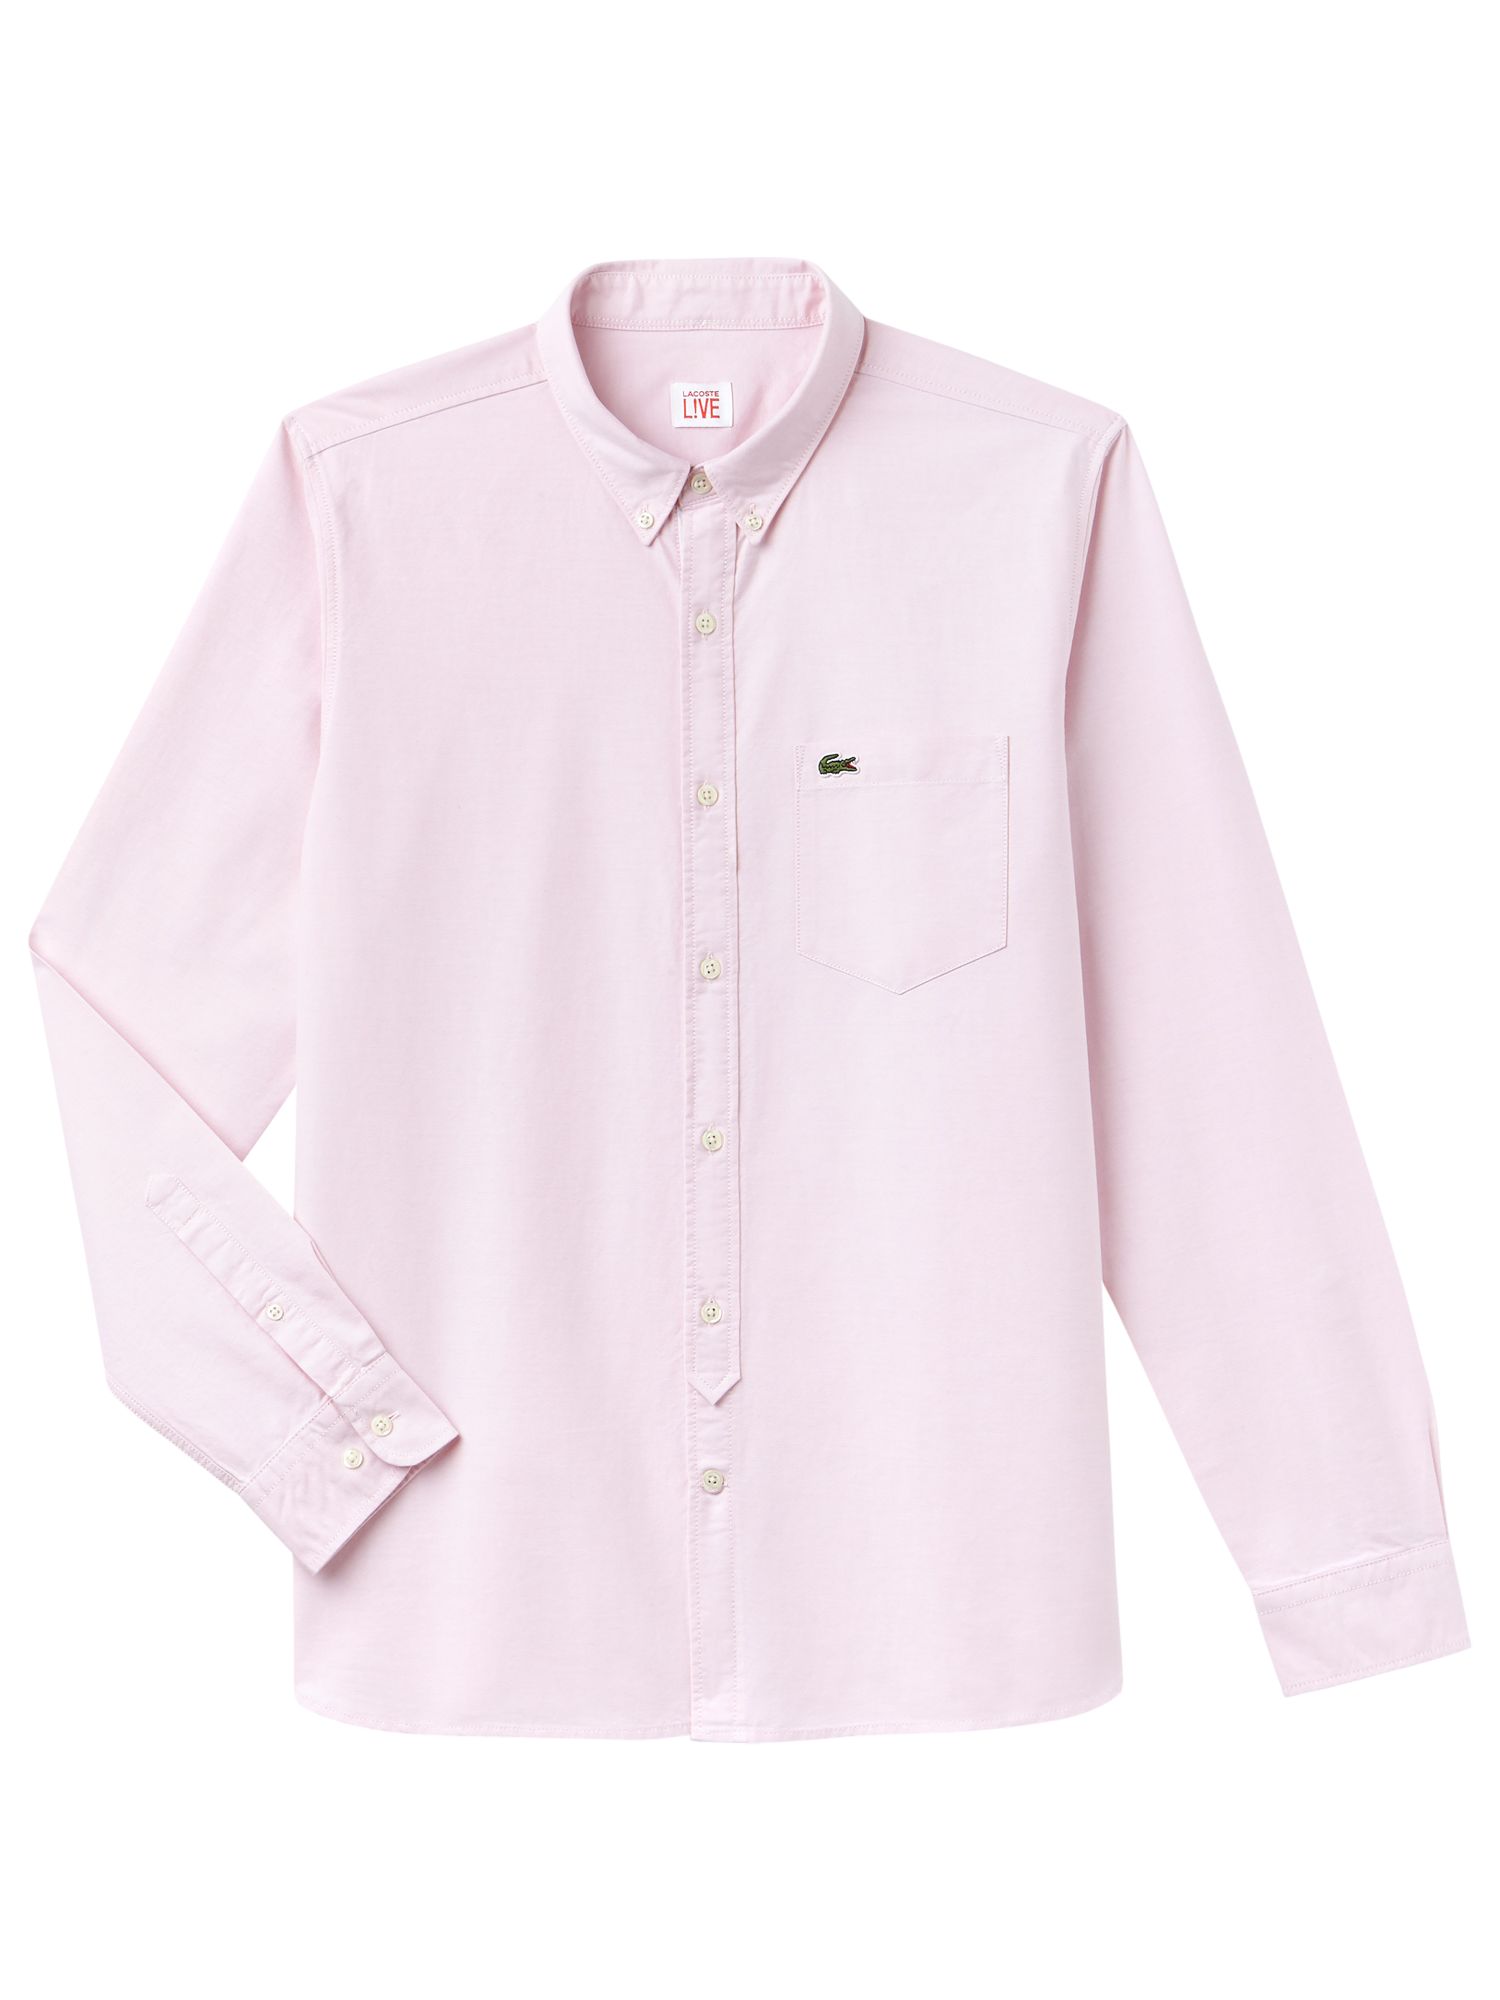 Lacoste LIVE Long Sleeve Oxford Shirt 